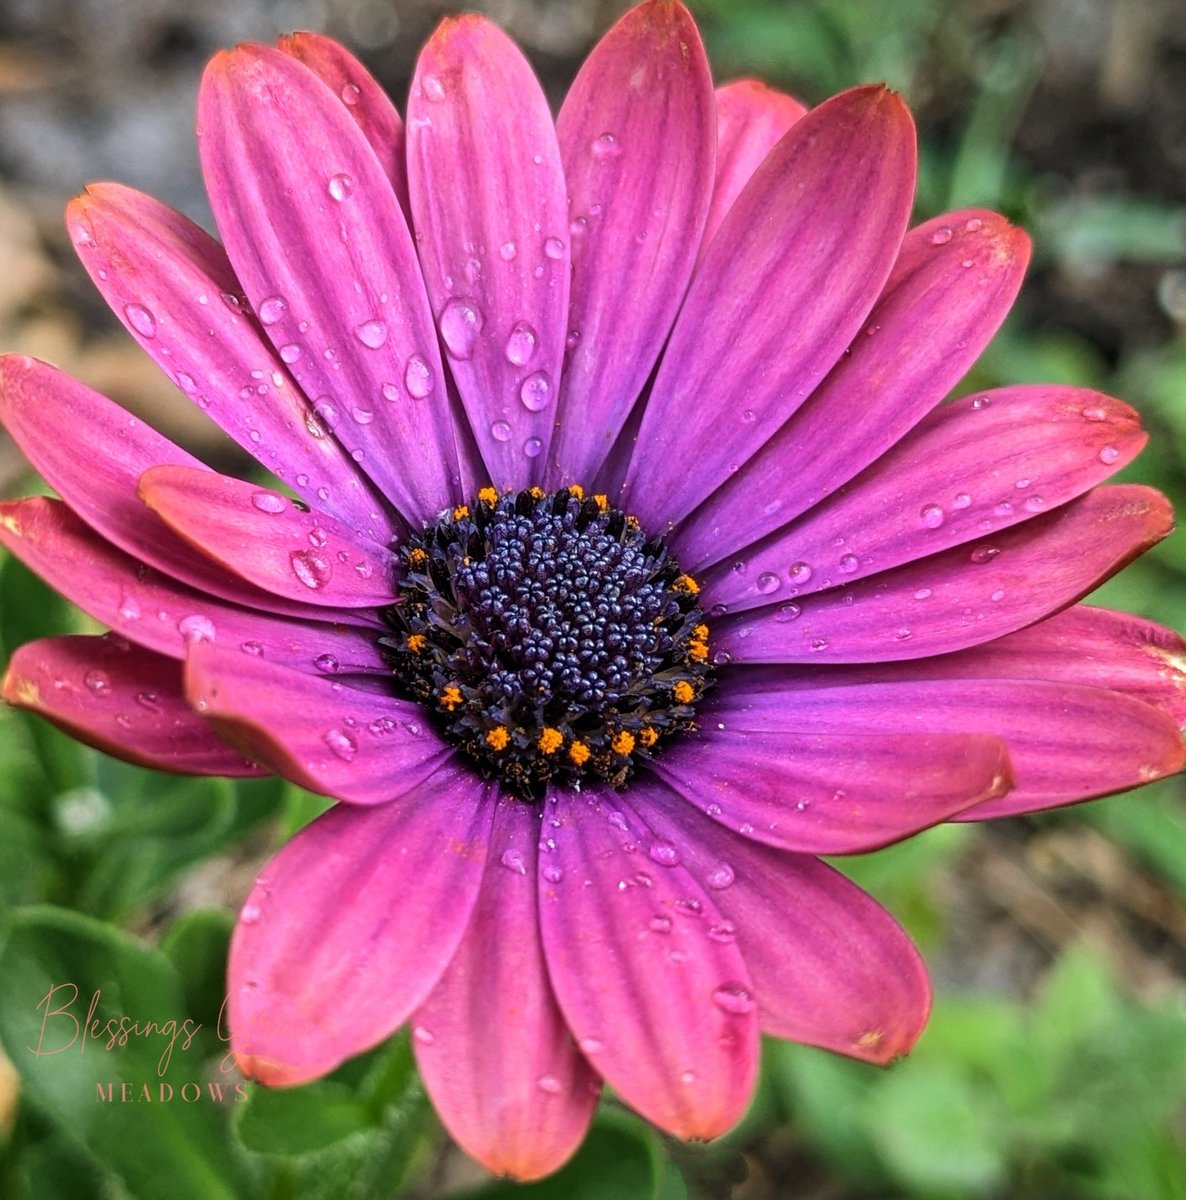 Year ✌️
Swooning over these colors @blessingsgrowmeadows
.
.
.
.
#daisy #africandaisy #BlessingsGrow #FlowerPower #GAFlowers #Godsbeauty #gardensofinstagram #flowerphotography #swoon